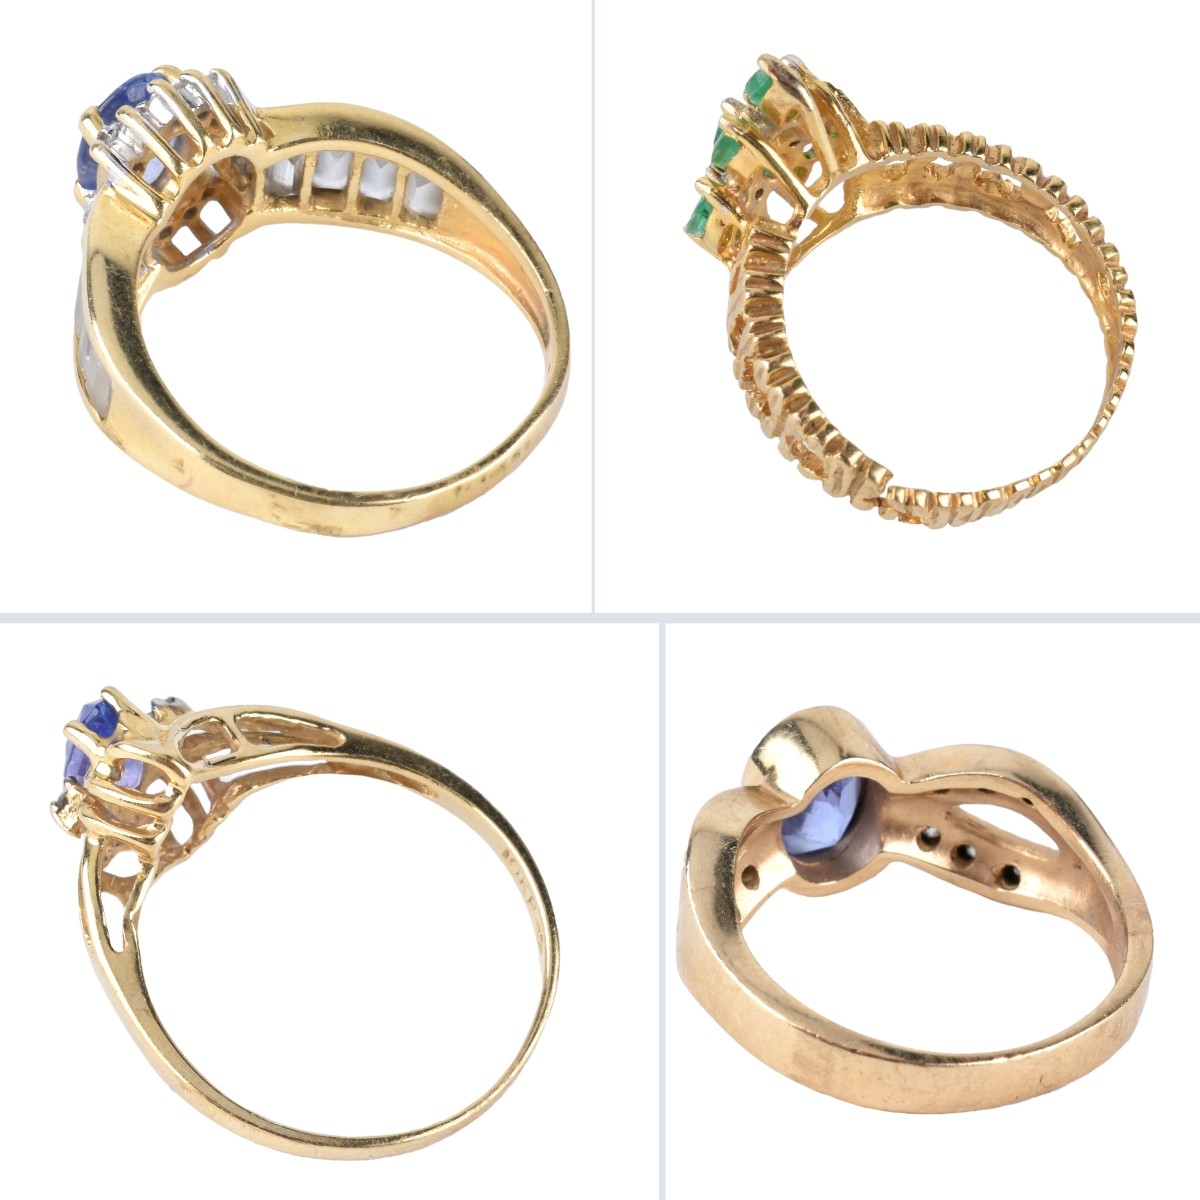 Four Vintage Gold and Gemstone Rings